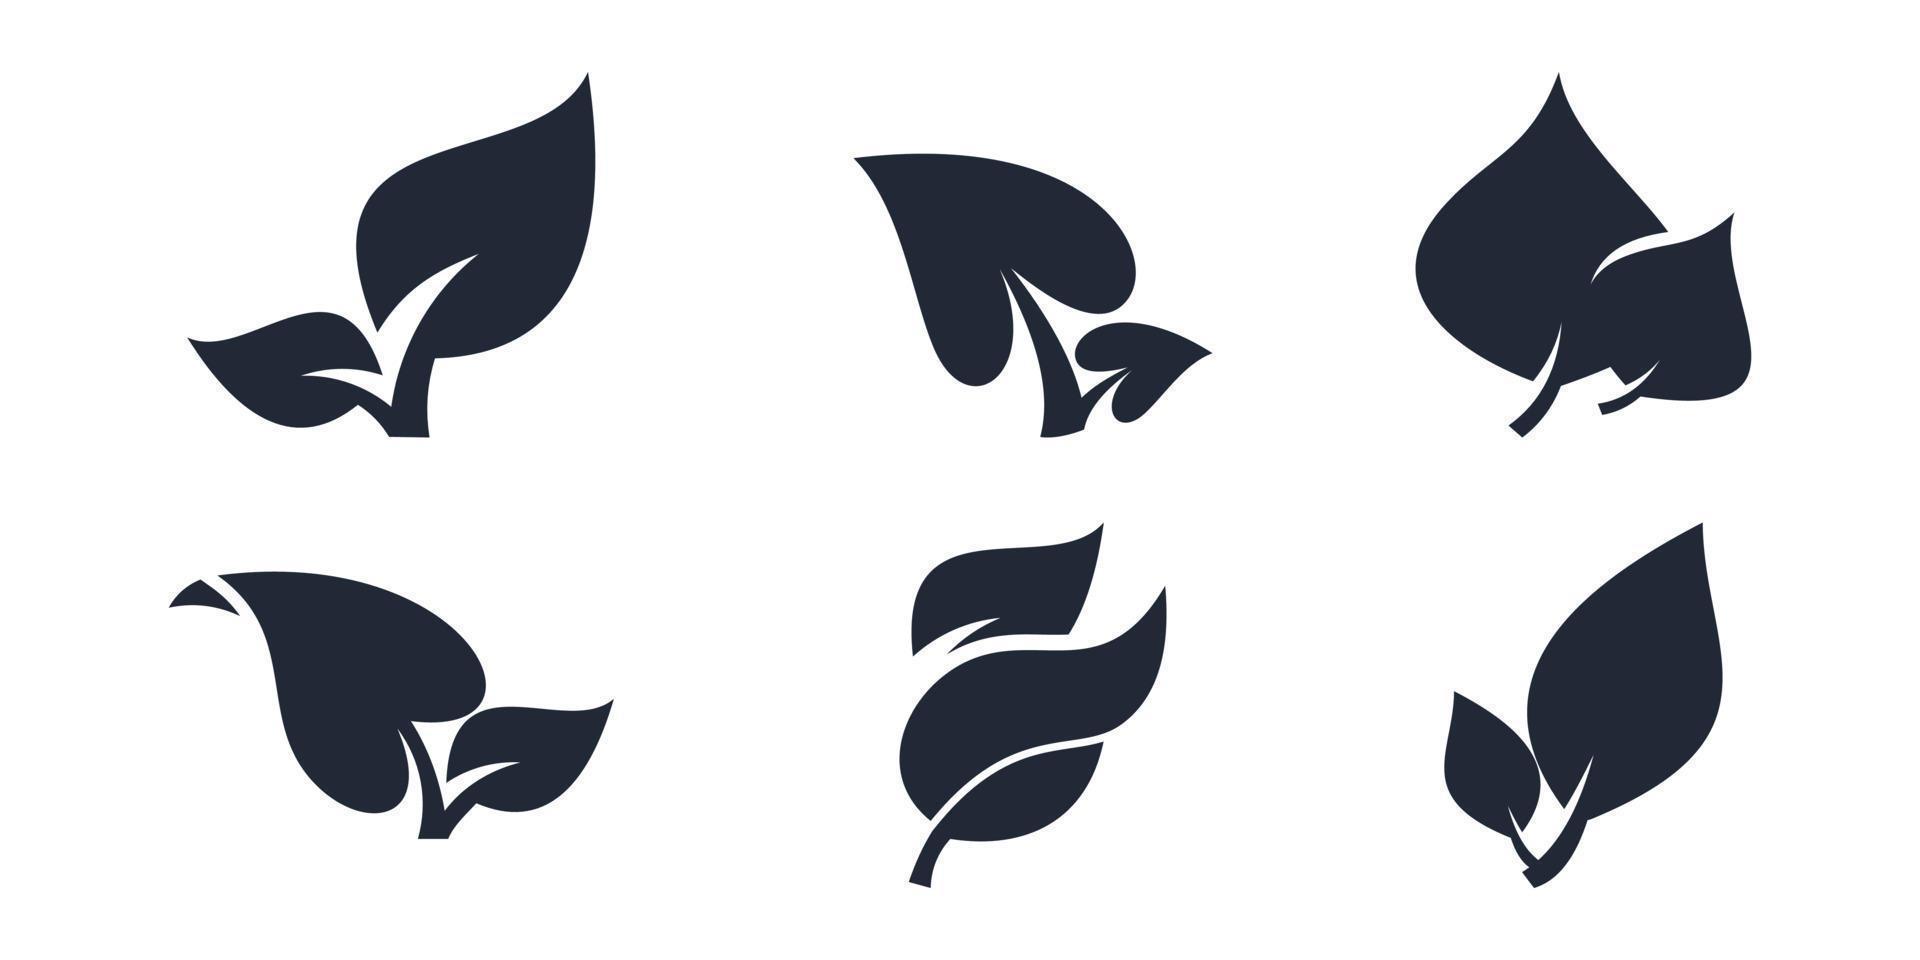 vector set of leaves in black on white background